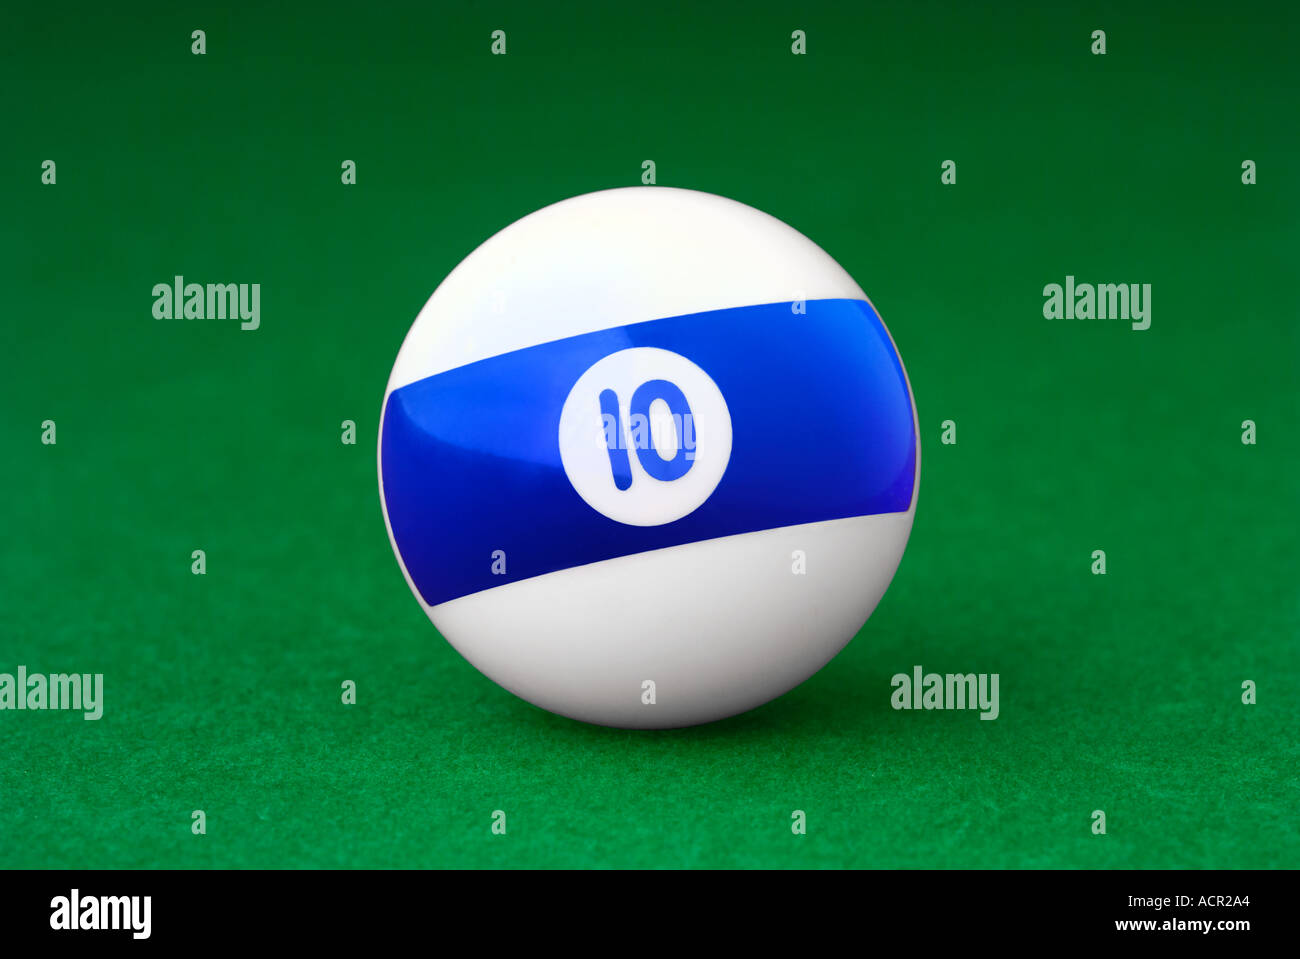 Number 10 Pool Ball Stock Photo